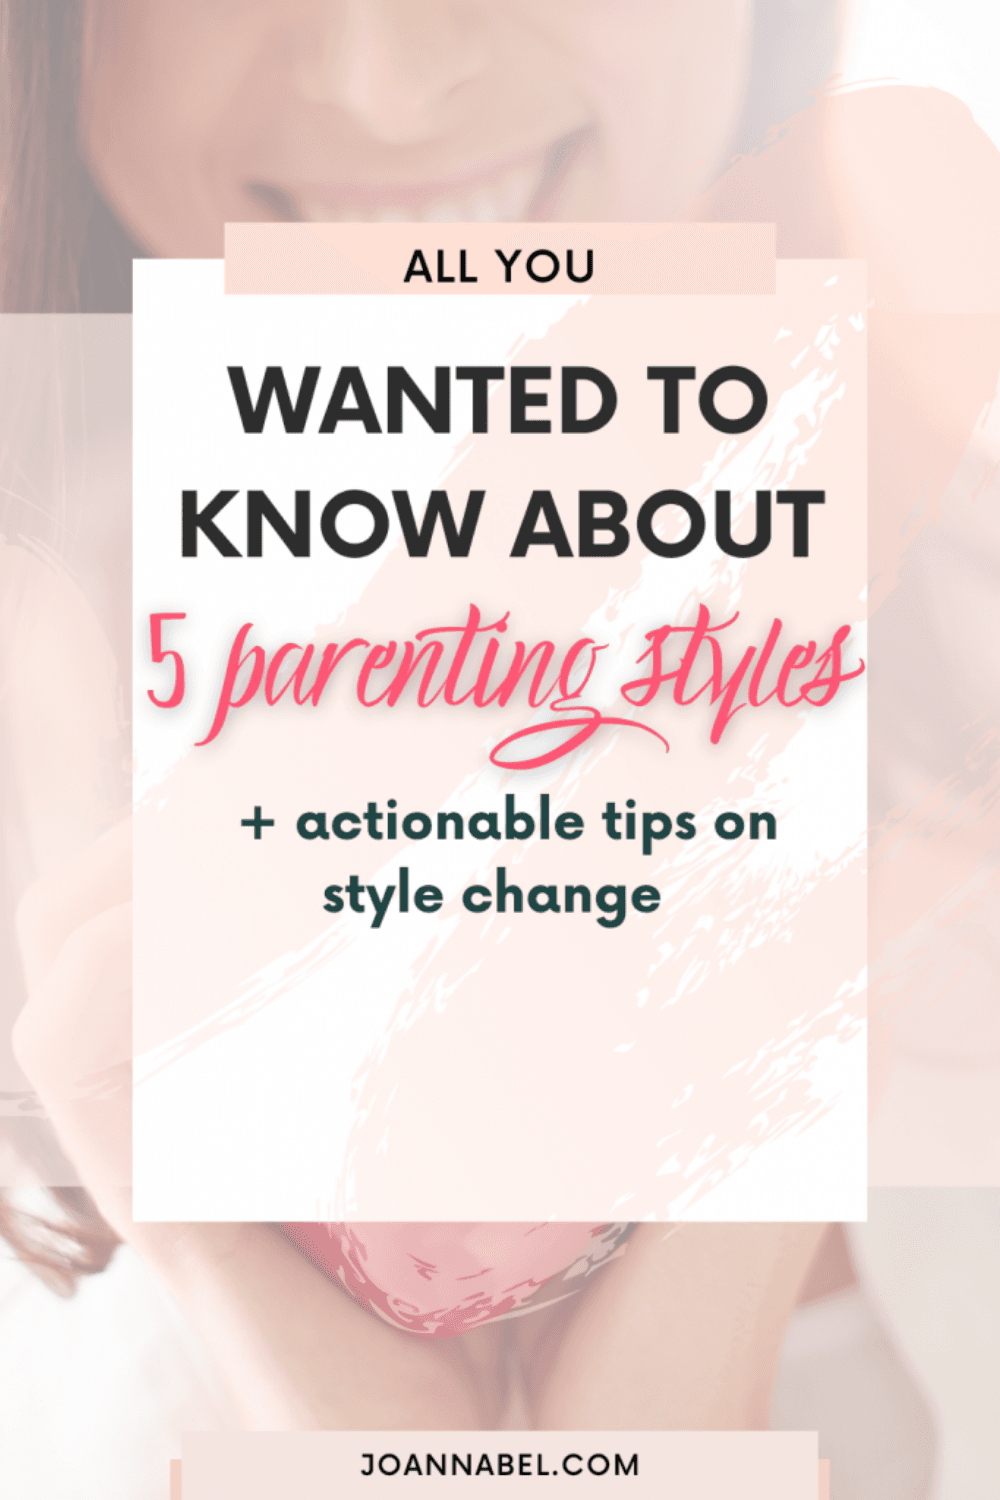 Pin image with text in front-all you wanted to know about 5 parenting styles + actionable tips on style change-and in the background is a woman holding a figure in a shape of a heart in her hands